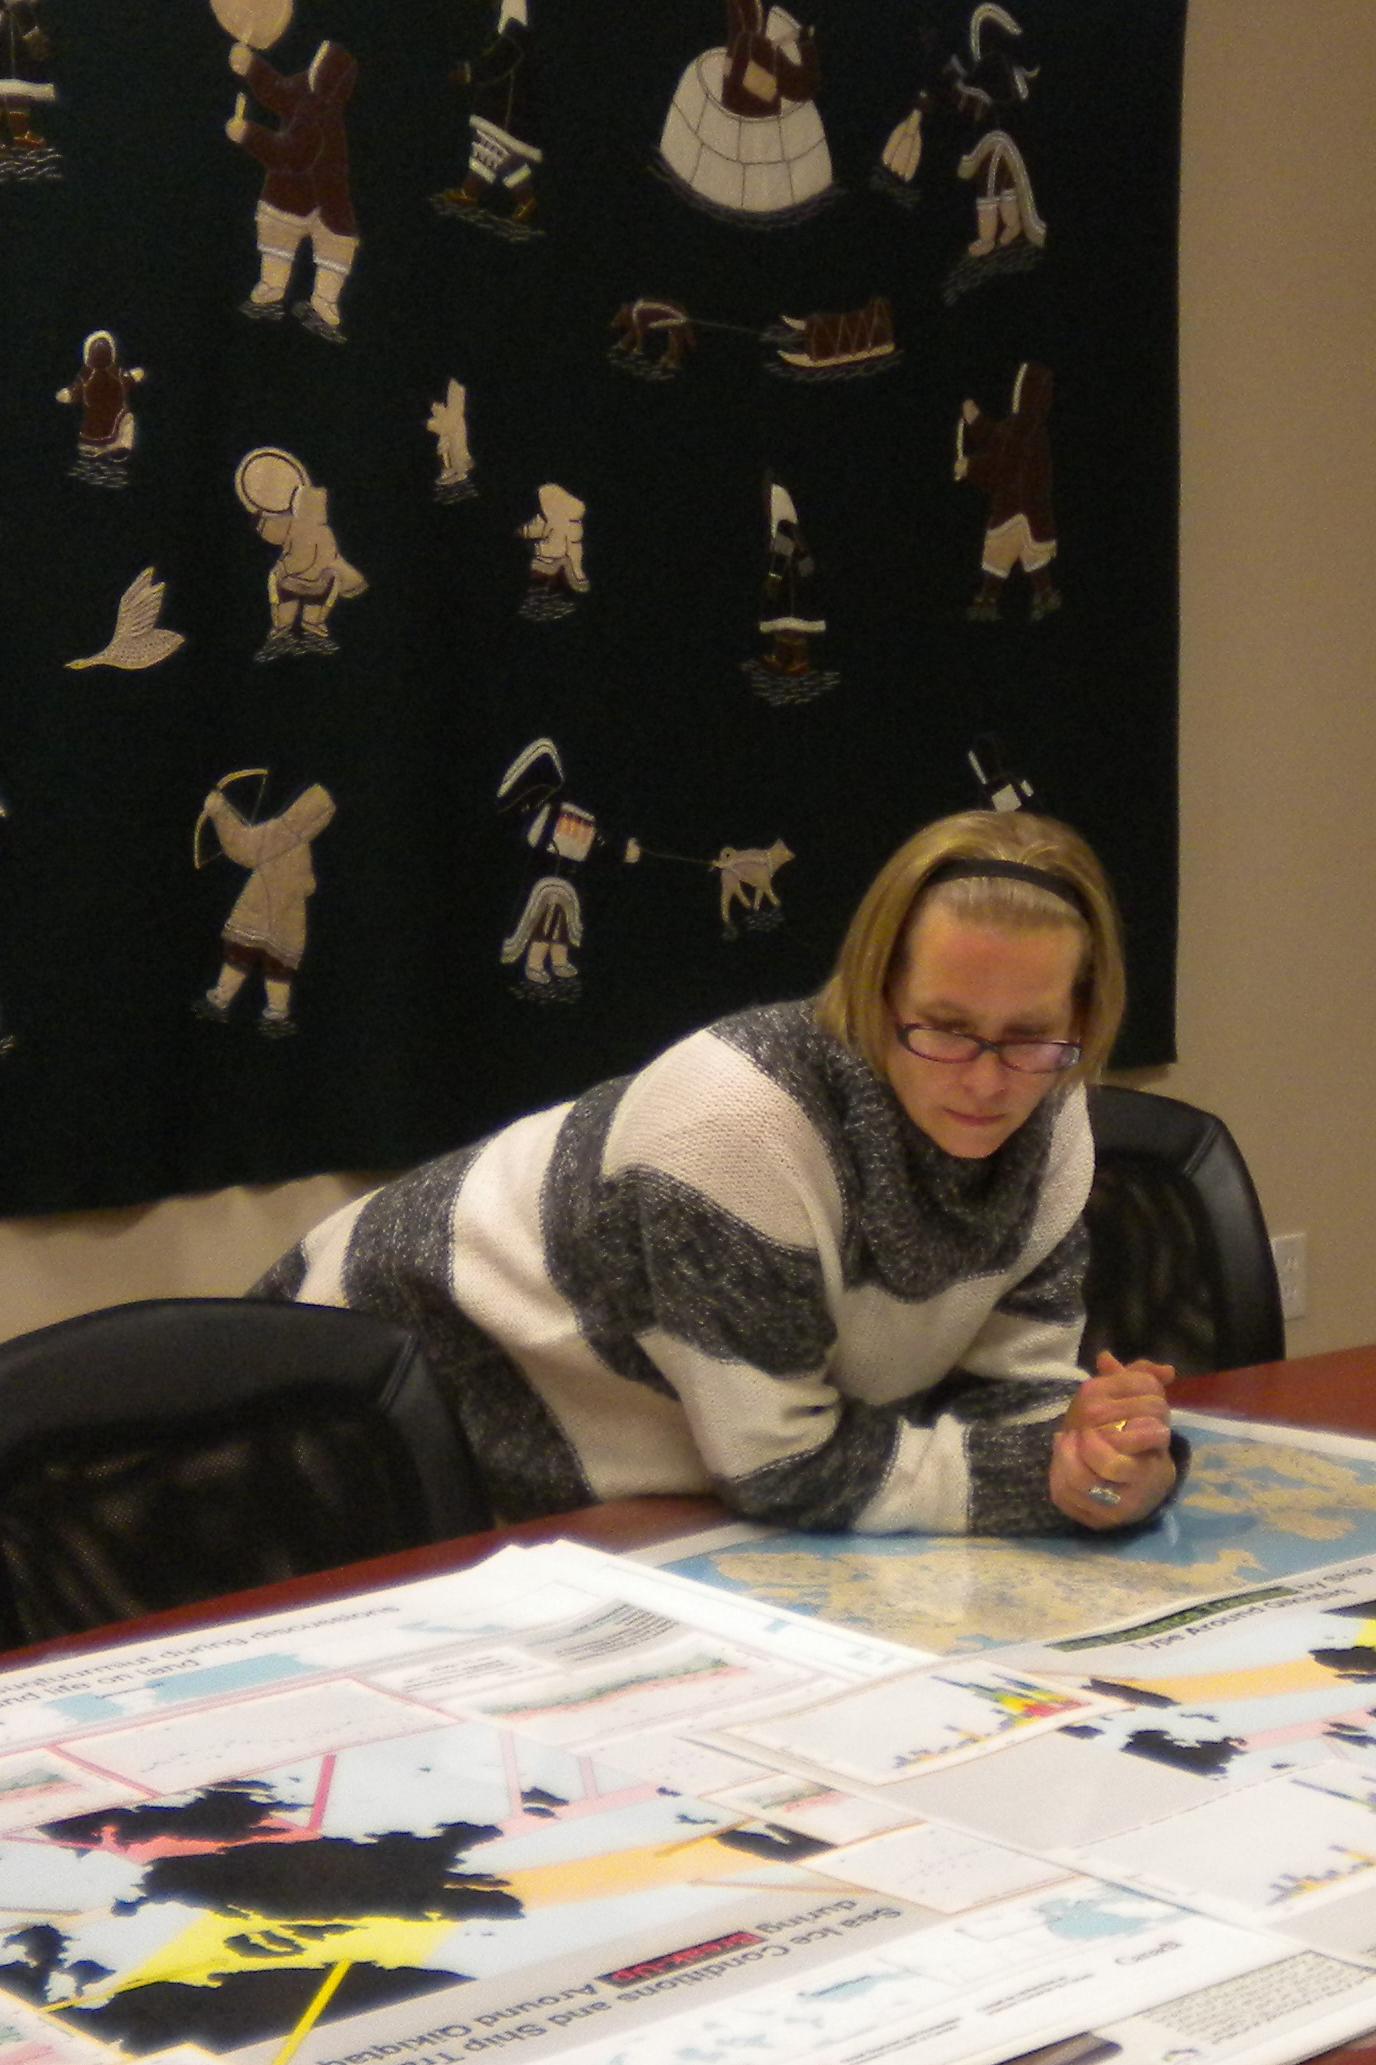 Photo of Cheryl Ann Johnson looking over research posters on a table